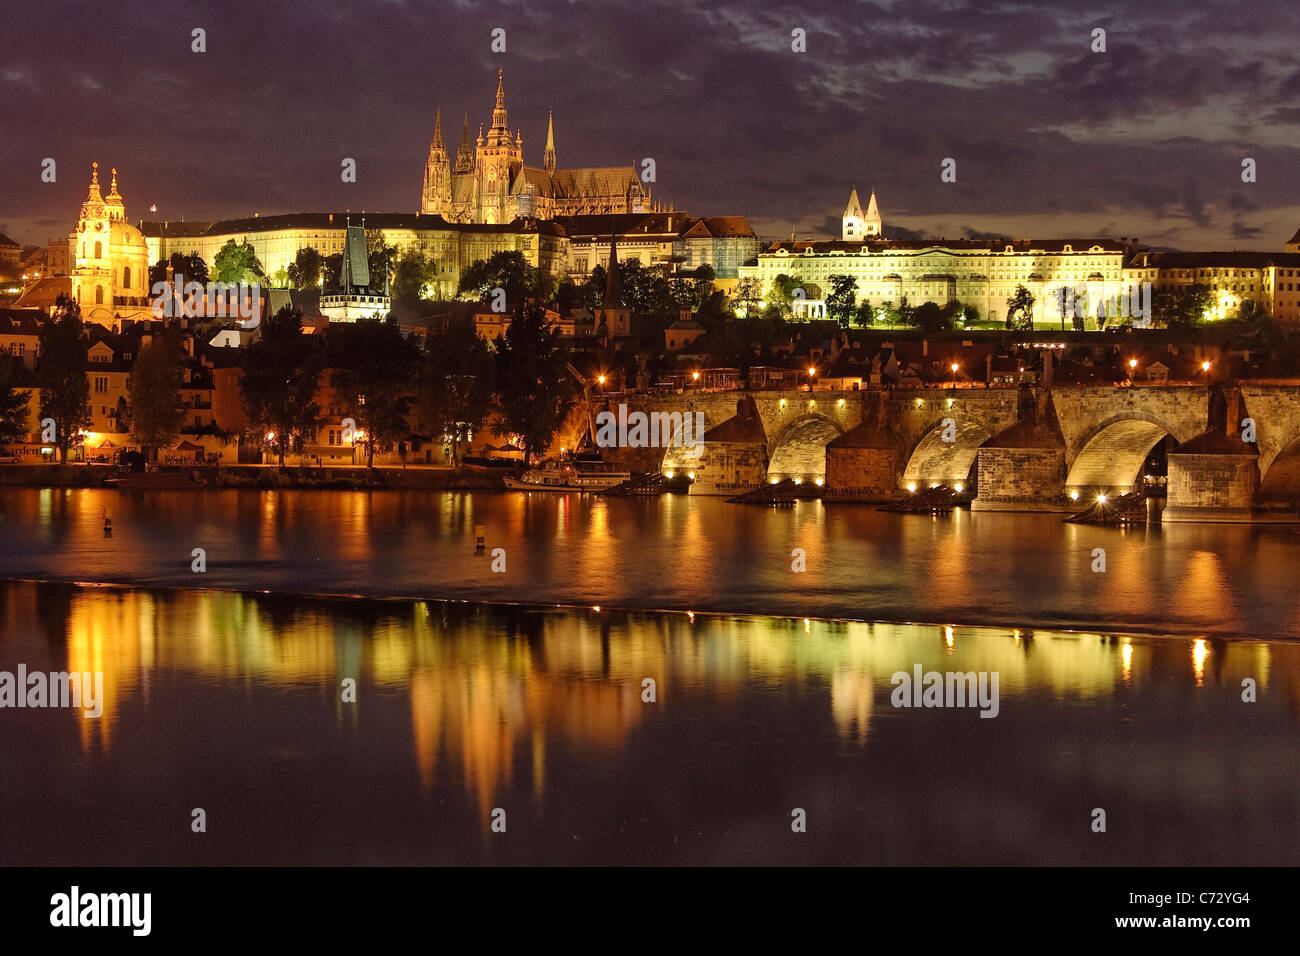 Evening Mood At The Charles Bridge With Prague Castle Hradcany